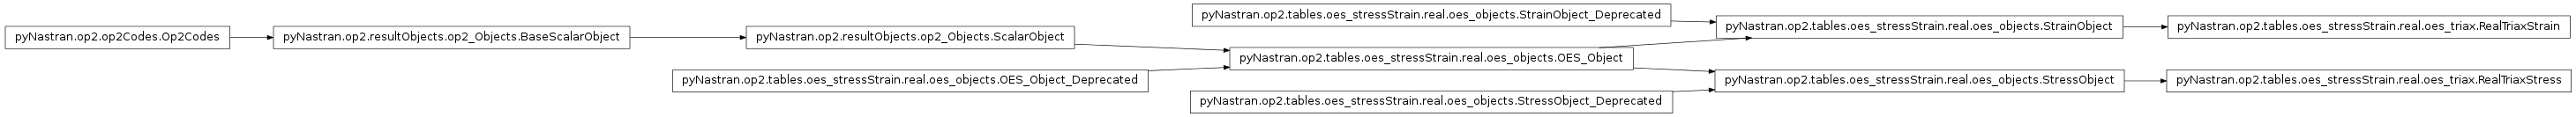 Inheritance diagram of pyNastran.op2.tables.oes_stressStrain.real.oes_triax